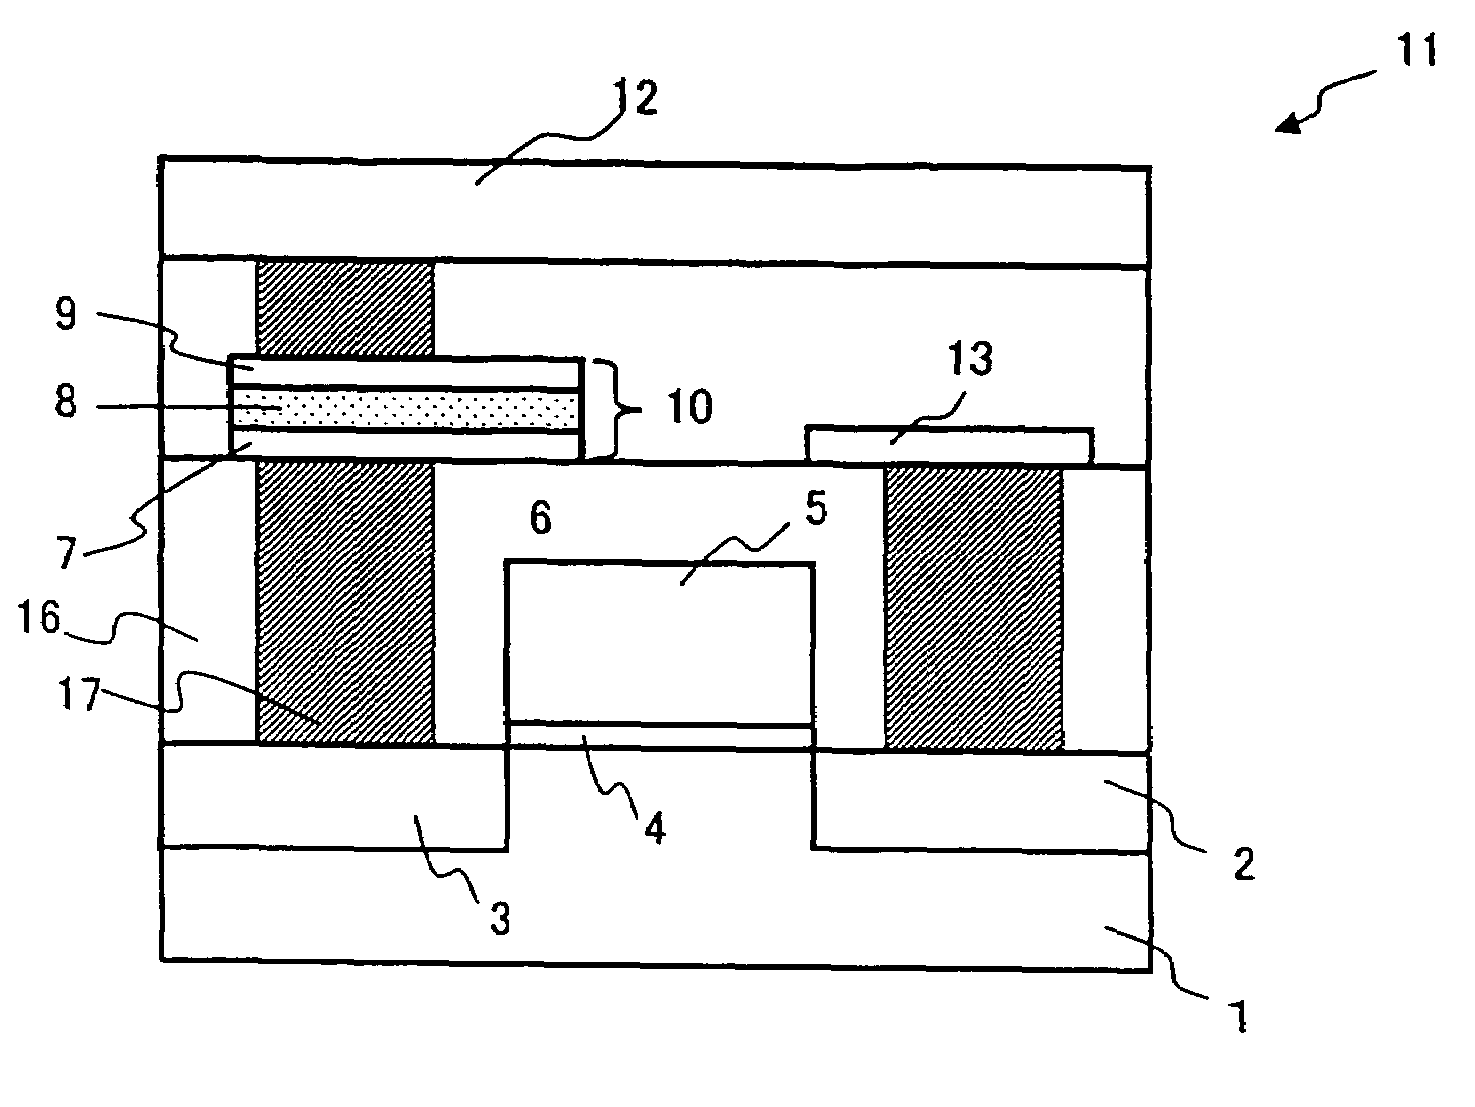 Nonvolatile semiconductor memory device comprising a variable resistive element containing a perovskite-type crystal structure